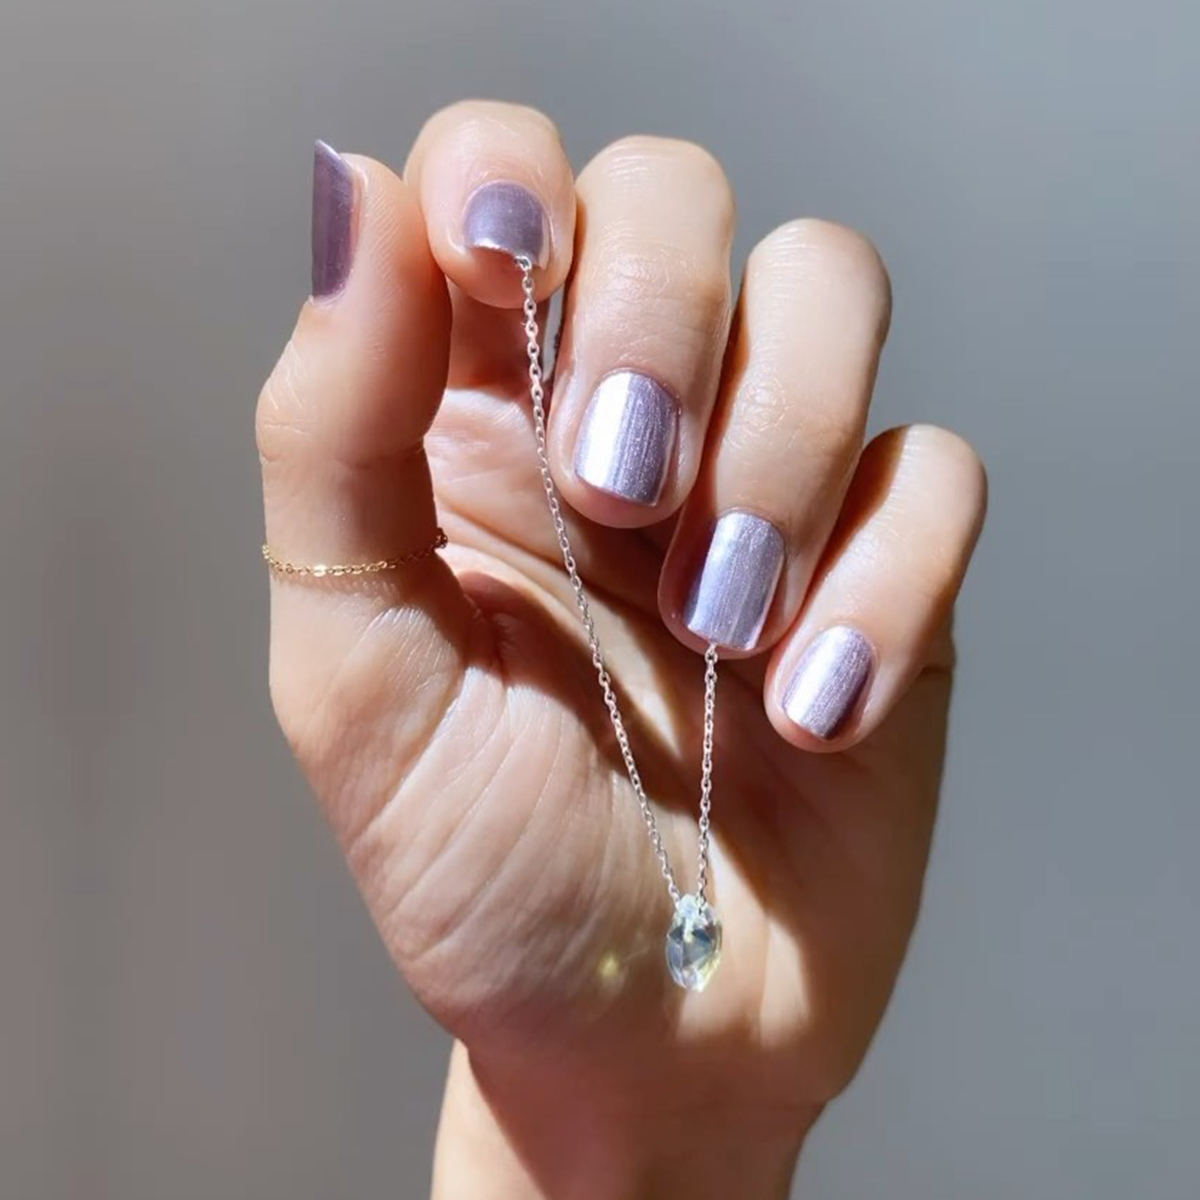 The 16 Best OPI Nail Colors for Fall, According to OPI HQ | Who What Wear